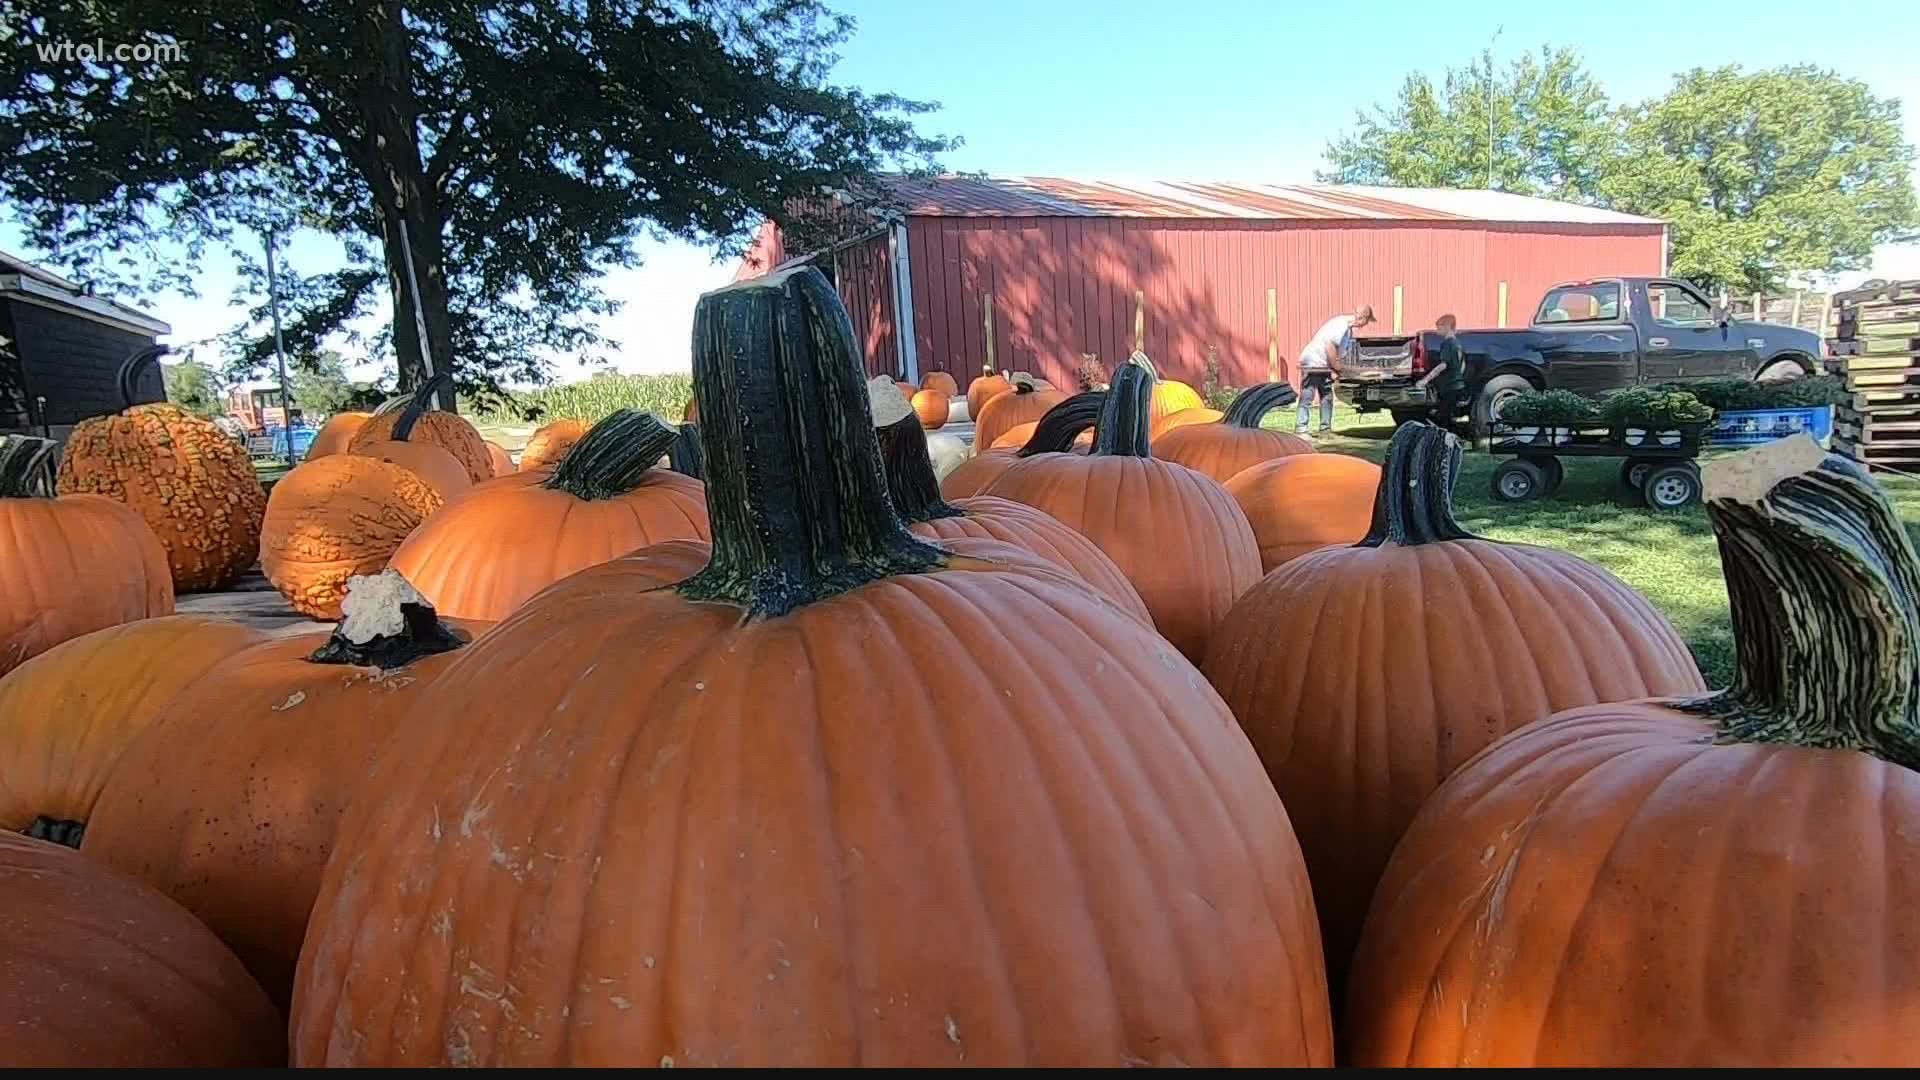 It's almost fall y'all! Get in the spirit with some cooler weather and fall activities at Fleitz Pumpkin Farm in Oregon!